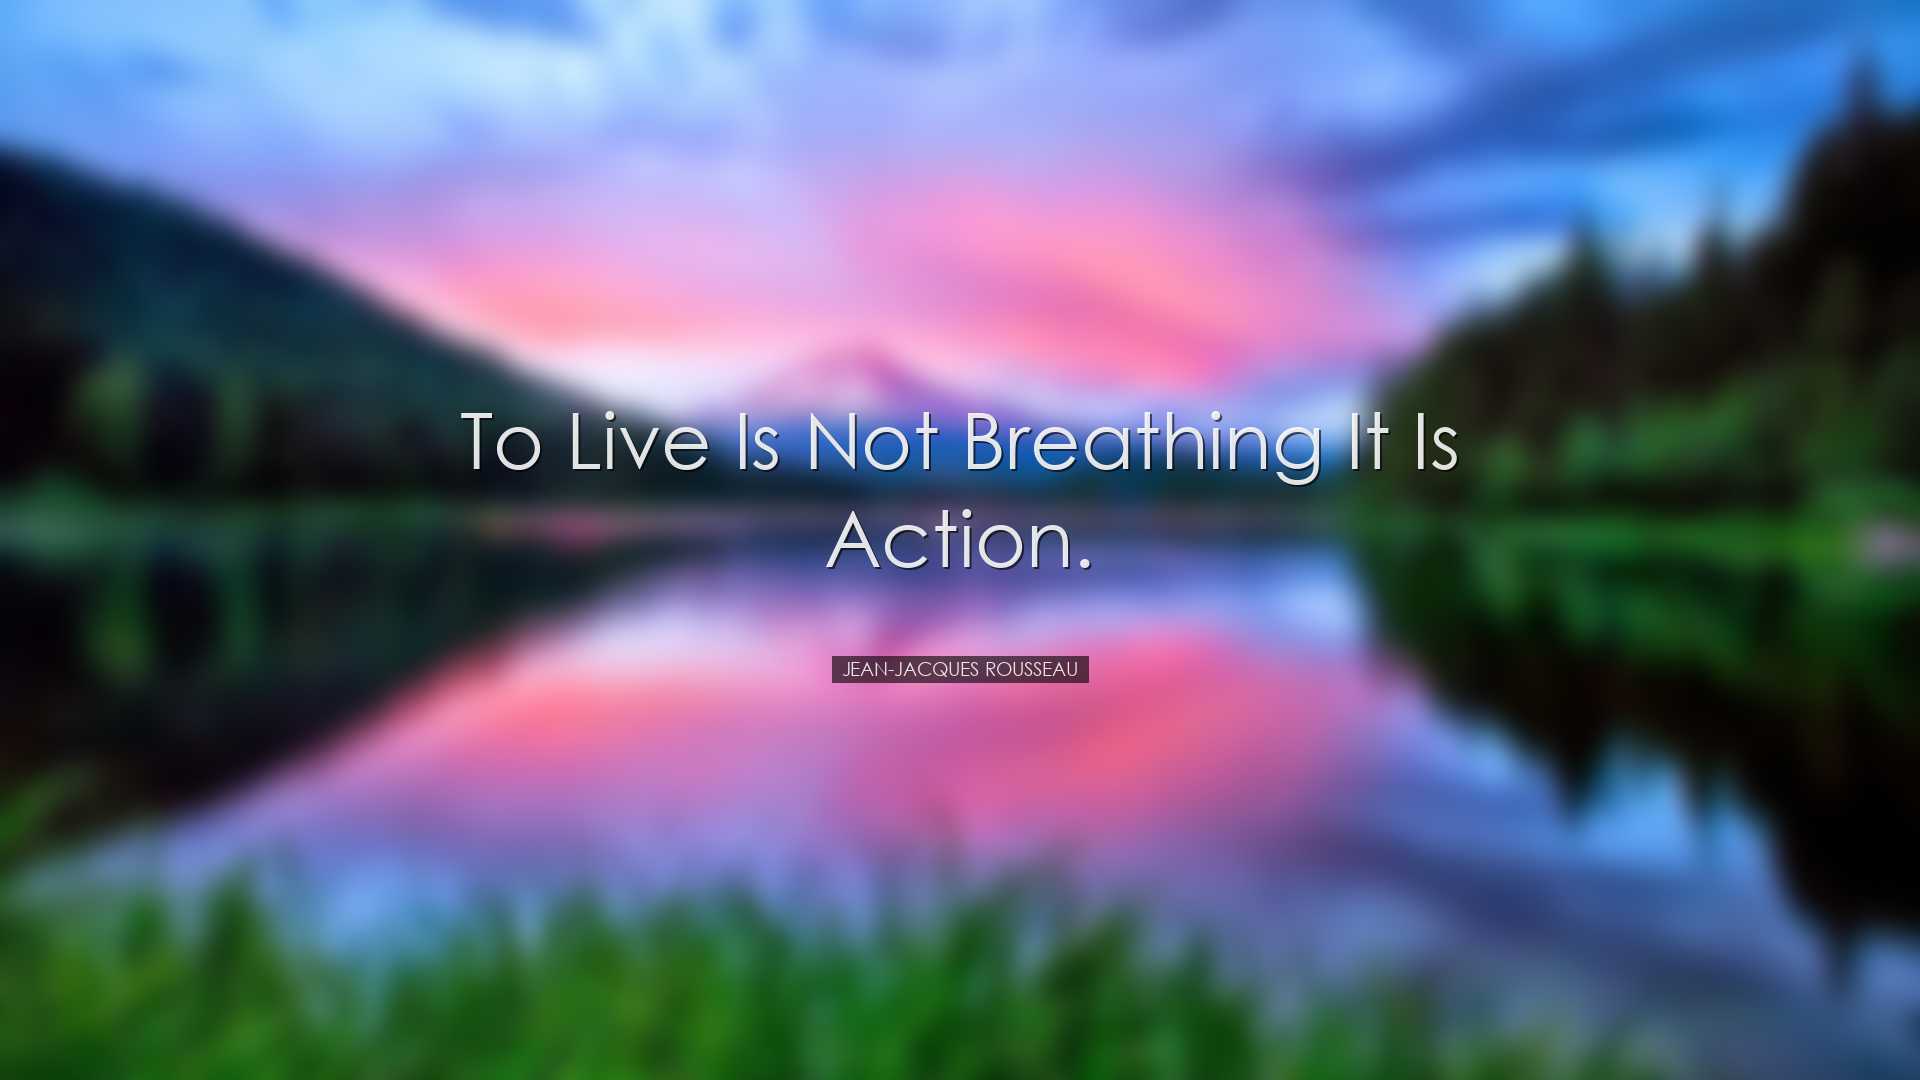 To live is not breathing it is action. - Jean-Jacques Rousseau